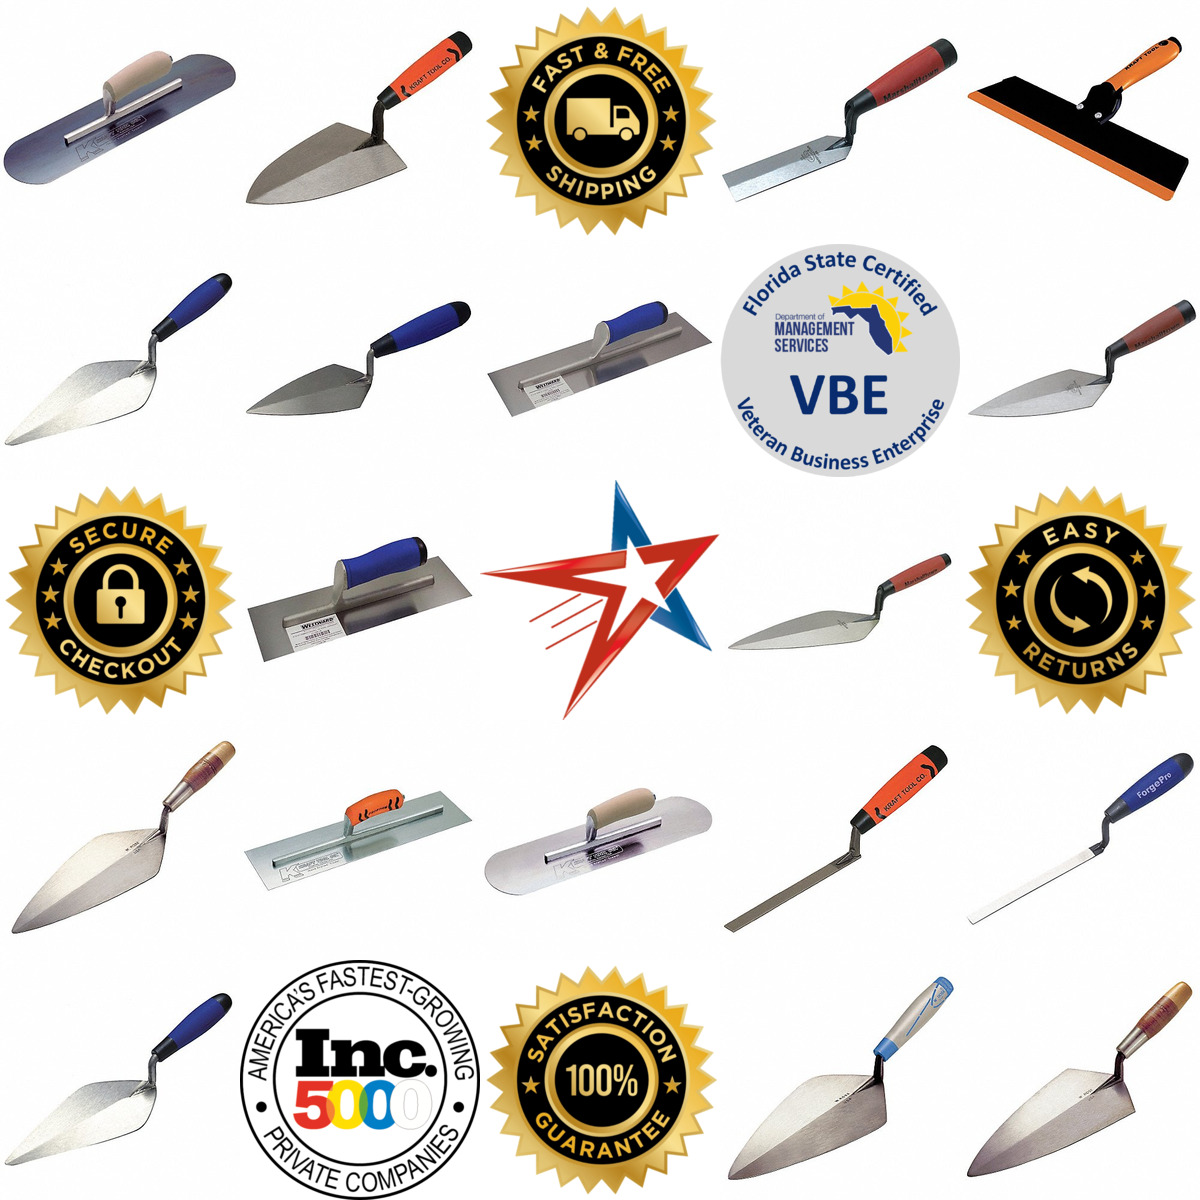 A selection of Masonry Trowels and Tuck Pointers products on GoVets